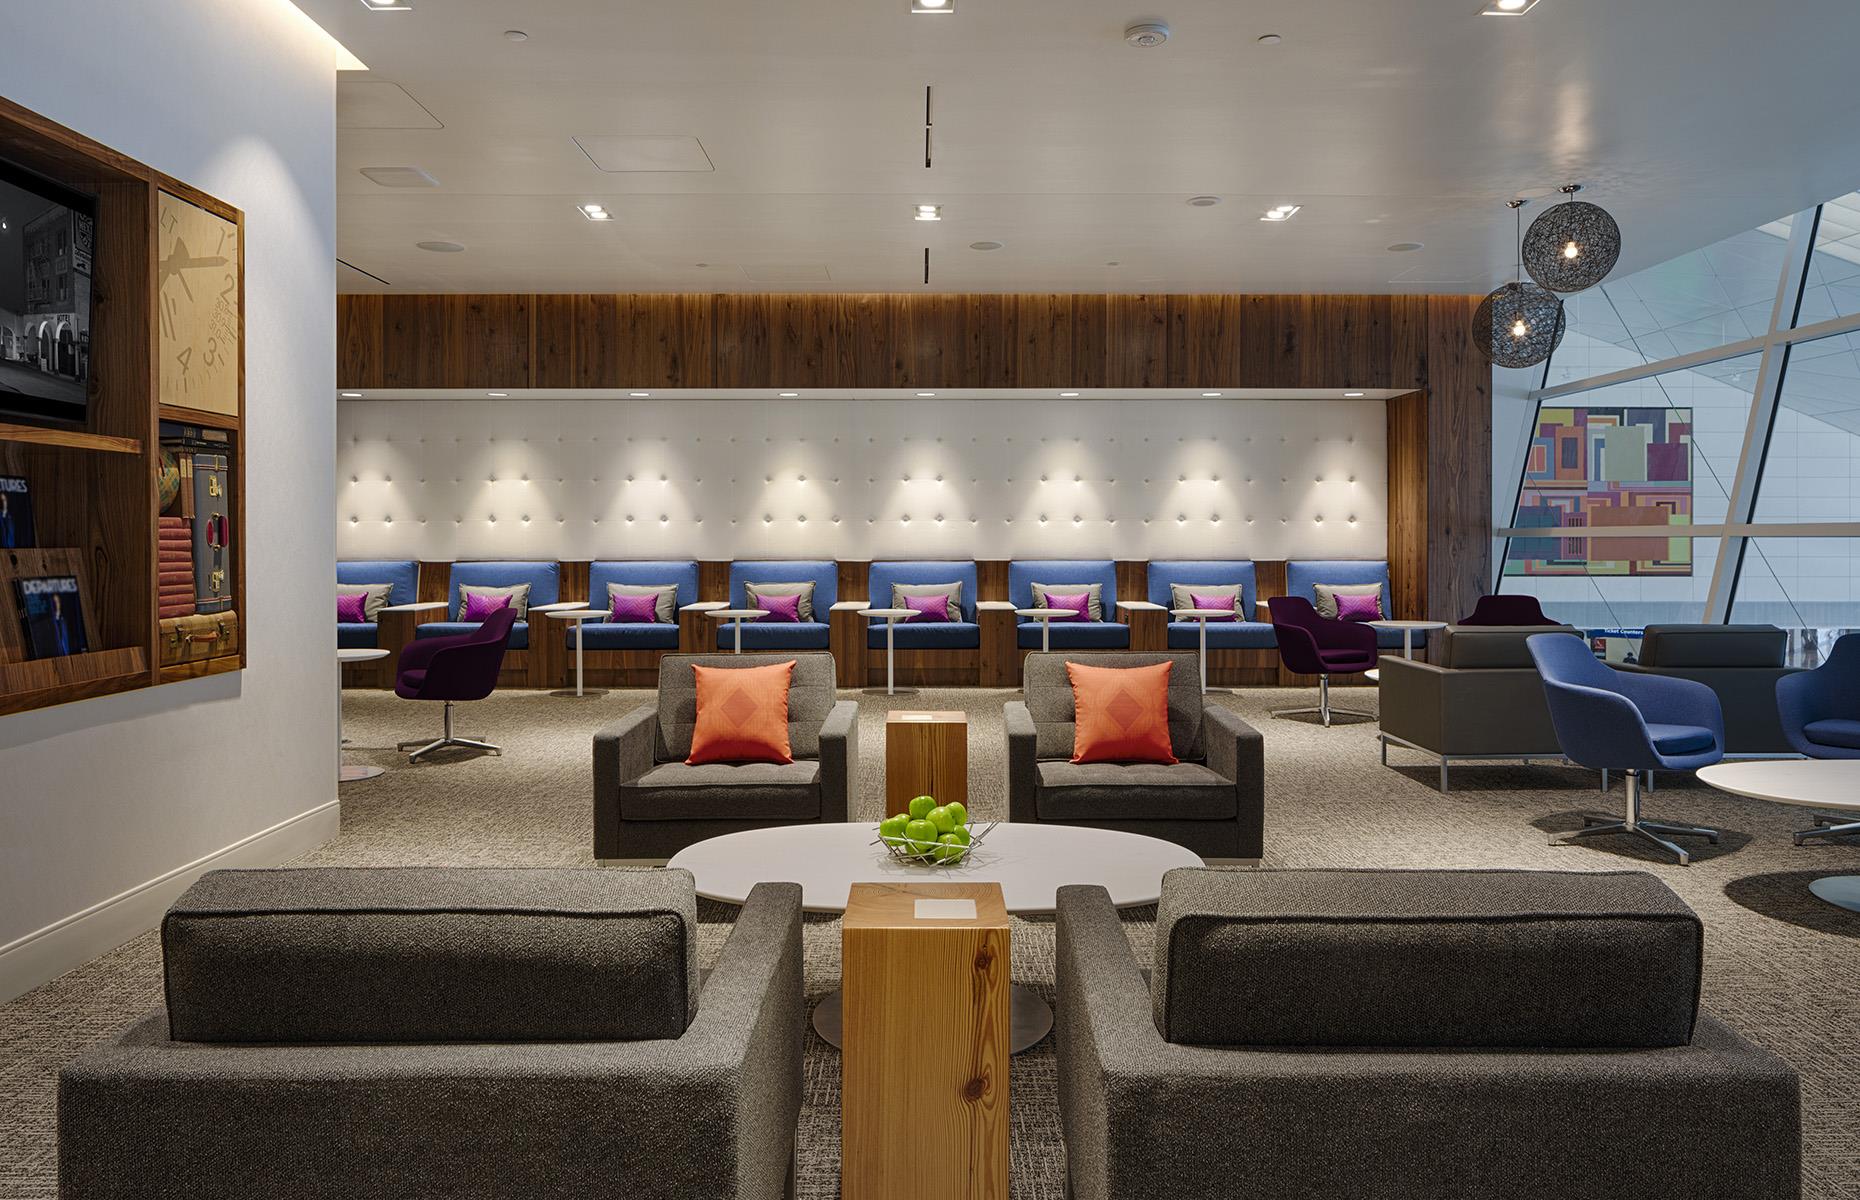 <p>If you're passing through Dallas, the <a href="https://thecenturionlounge.com/locations/dfw/">American Express Centurion Lounge</a> makes it very difficult to continue with your onward journey. This lounge really goes the extra (air)mile for its customers. Forget the sad buffets of other airport lounges – here there's an à la carte menu designed by James Beard Award-winning chef Dean Fearing, with dishes like vanilla French toast for breakfast or Texas mole for dinner.</p>